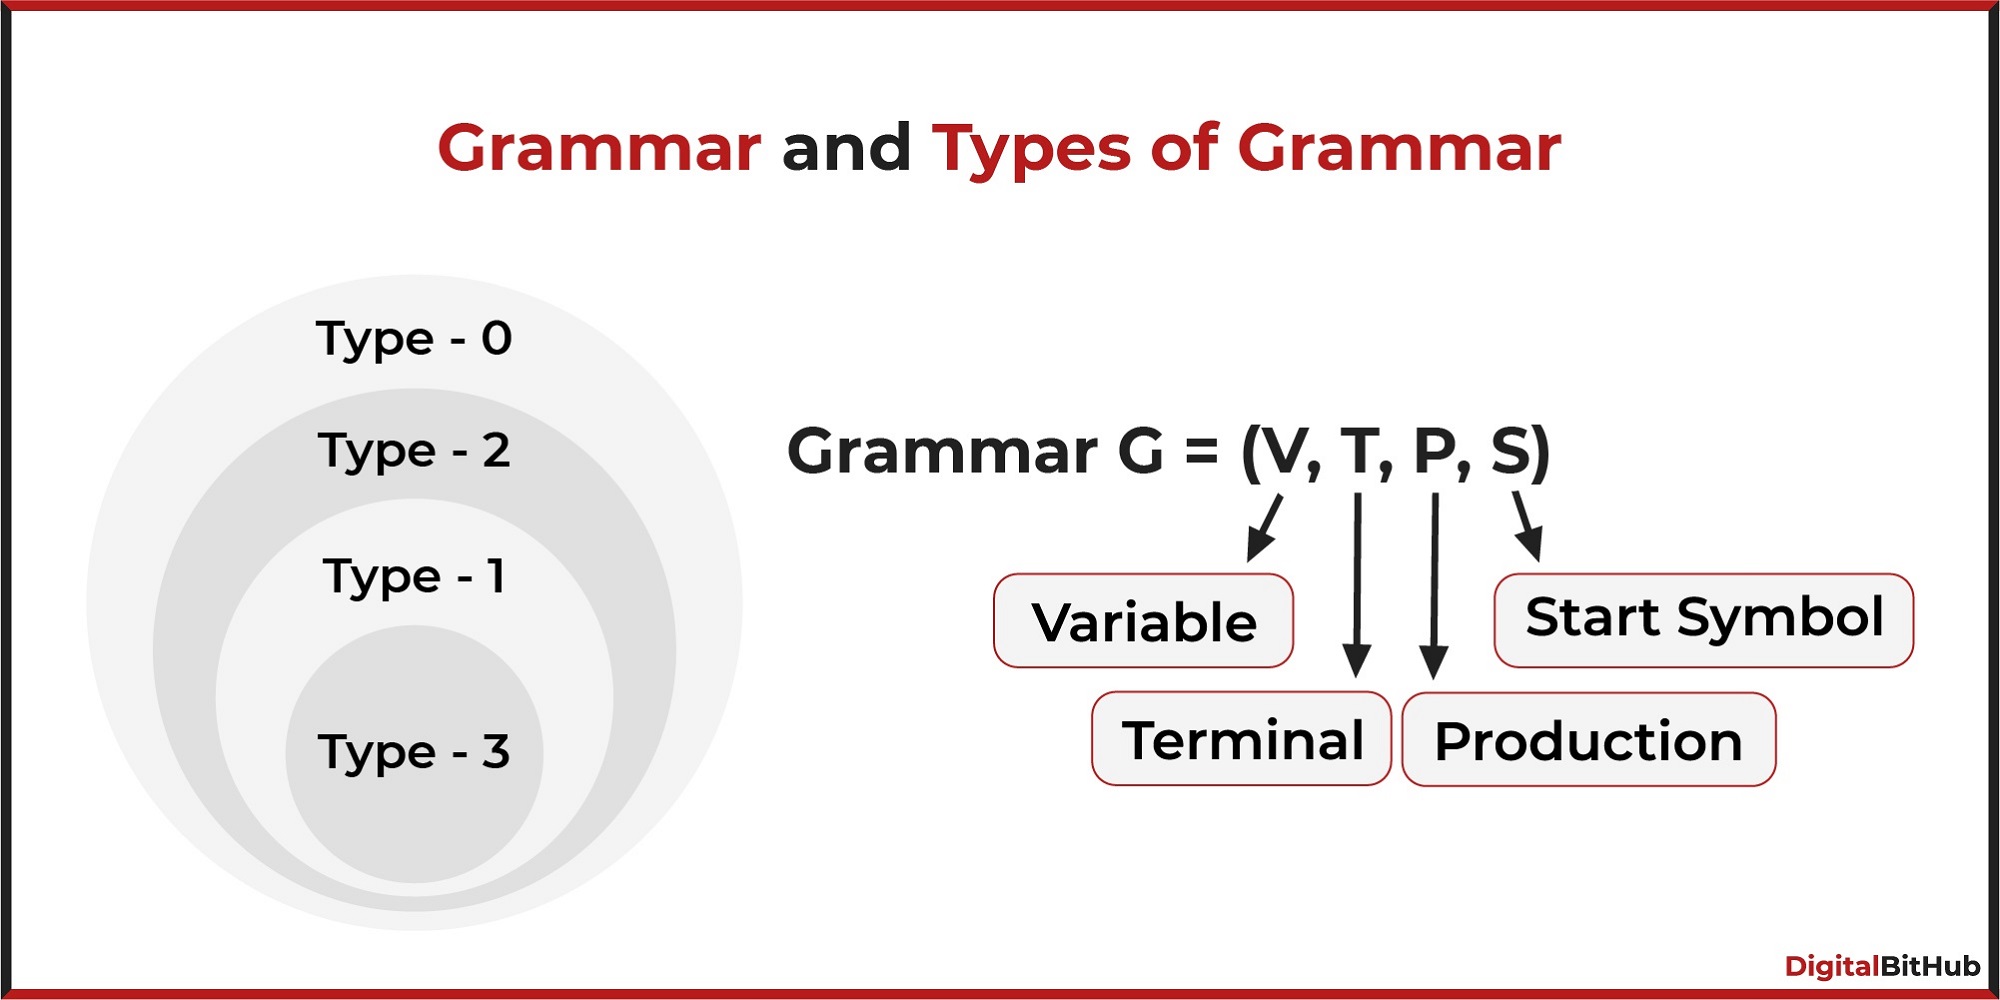 Introduction to Grammar and types of Grammar